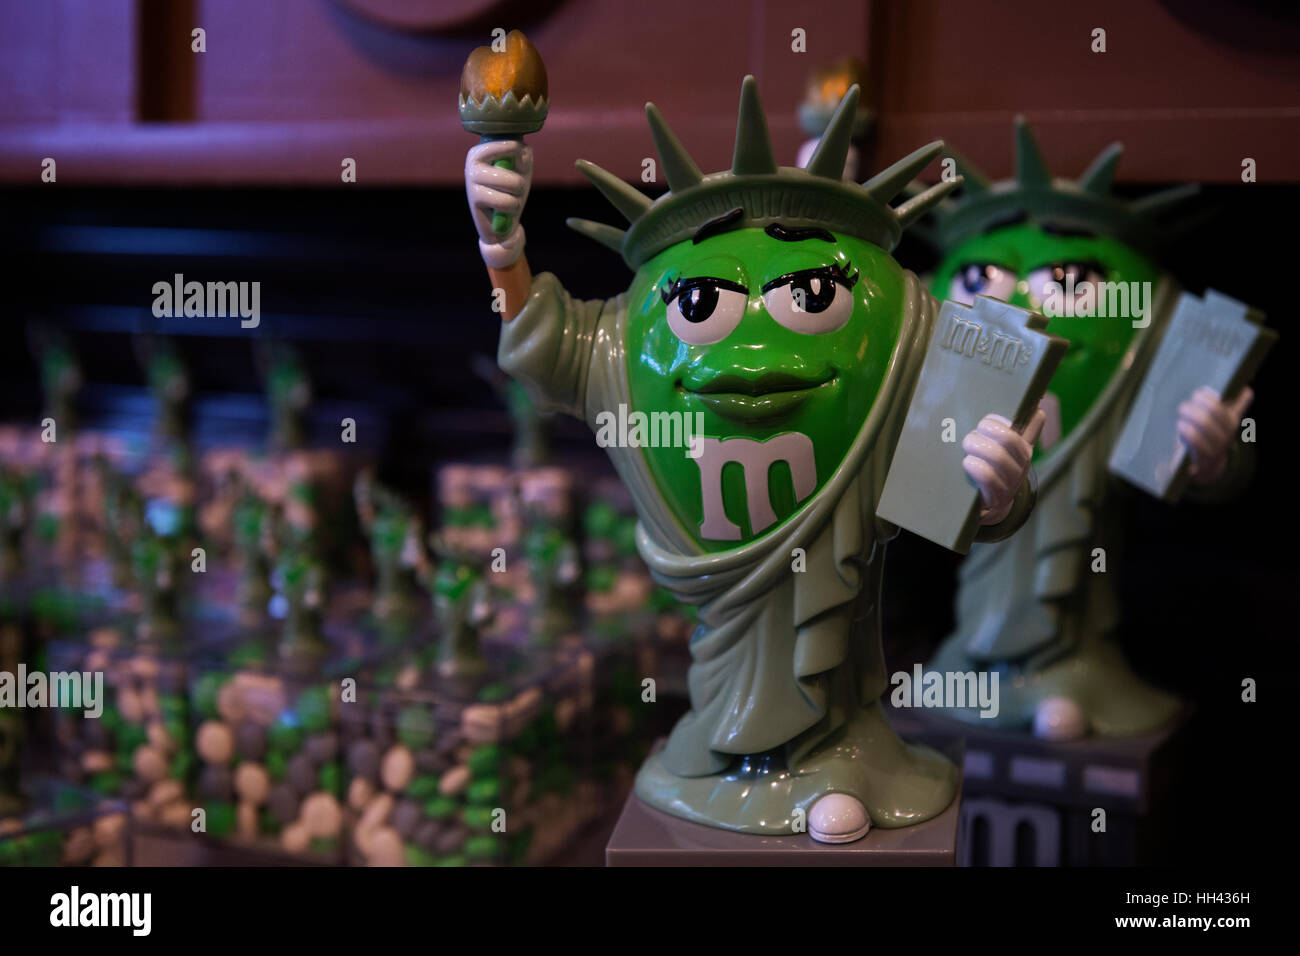 M&M's green character as Statue of Liberty candy dispenser displayed at M&M's world in Times Square, Manhattan, New York City. Stock Photo